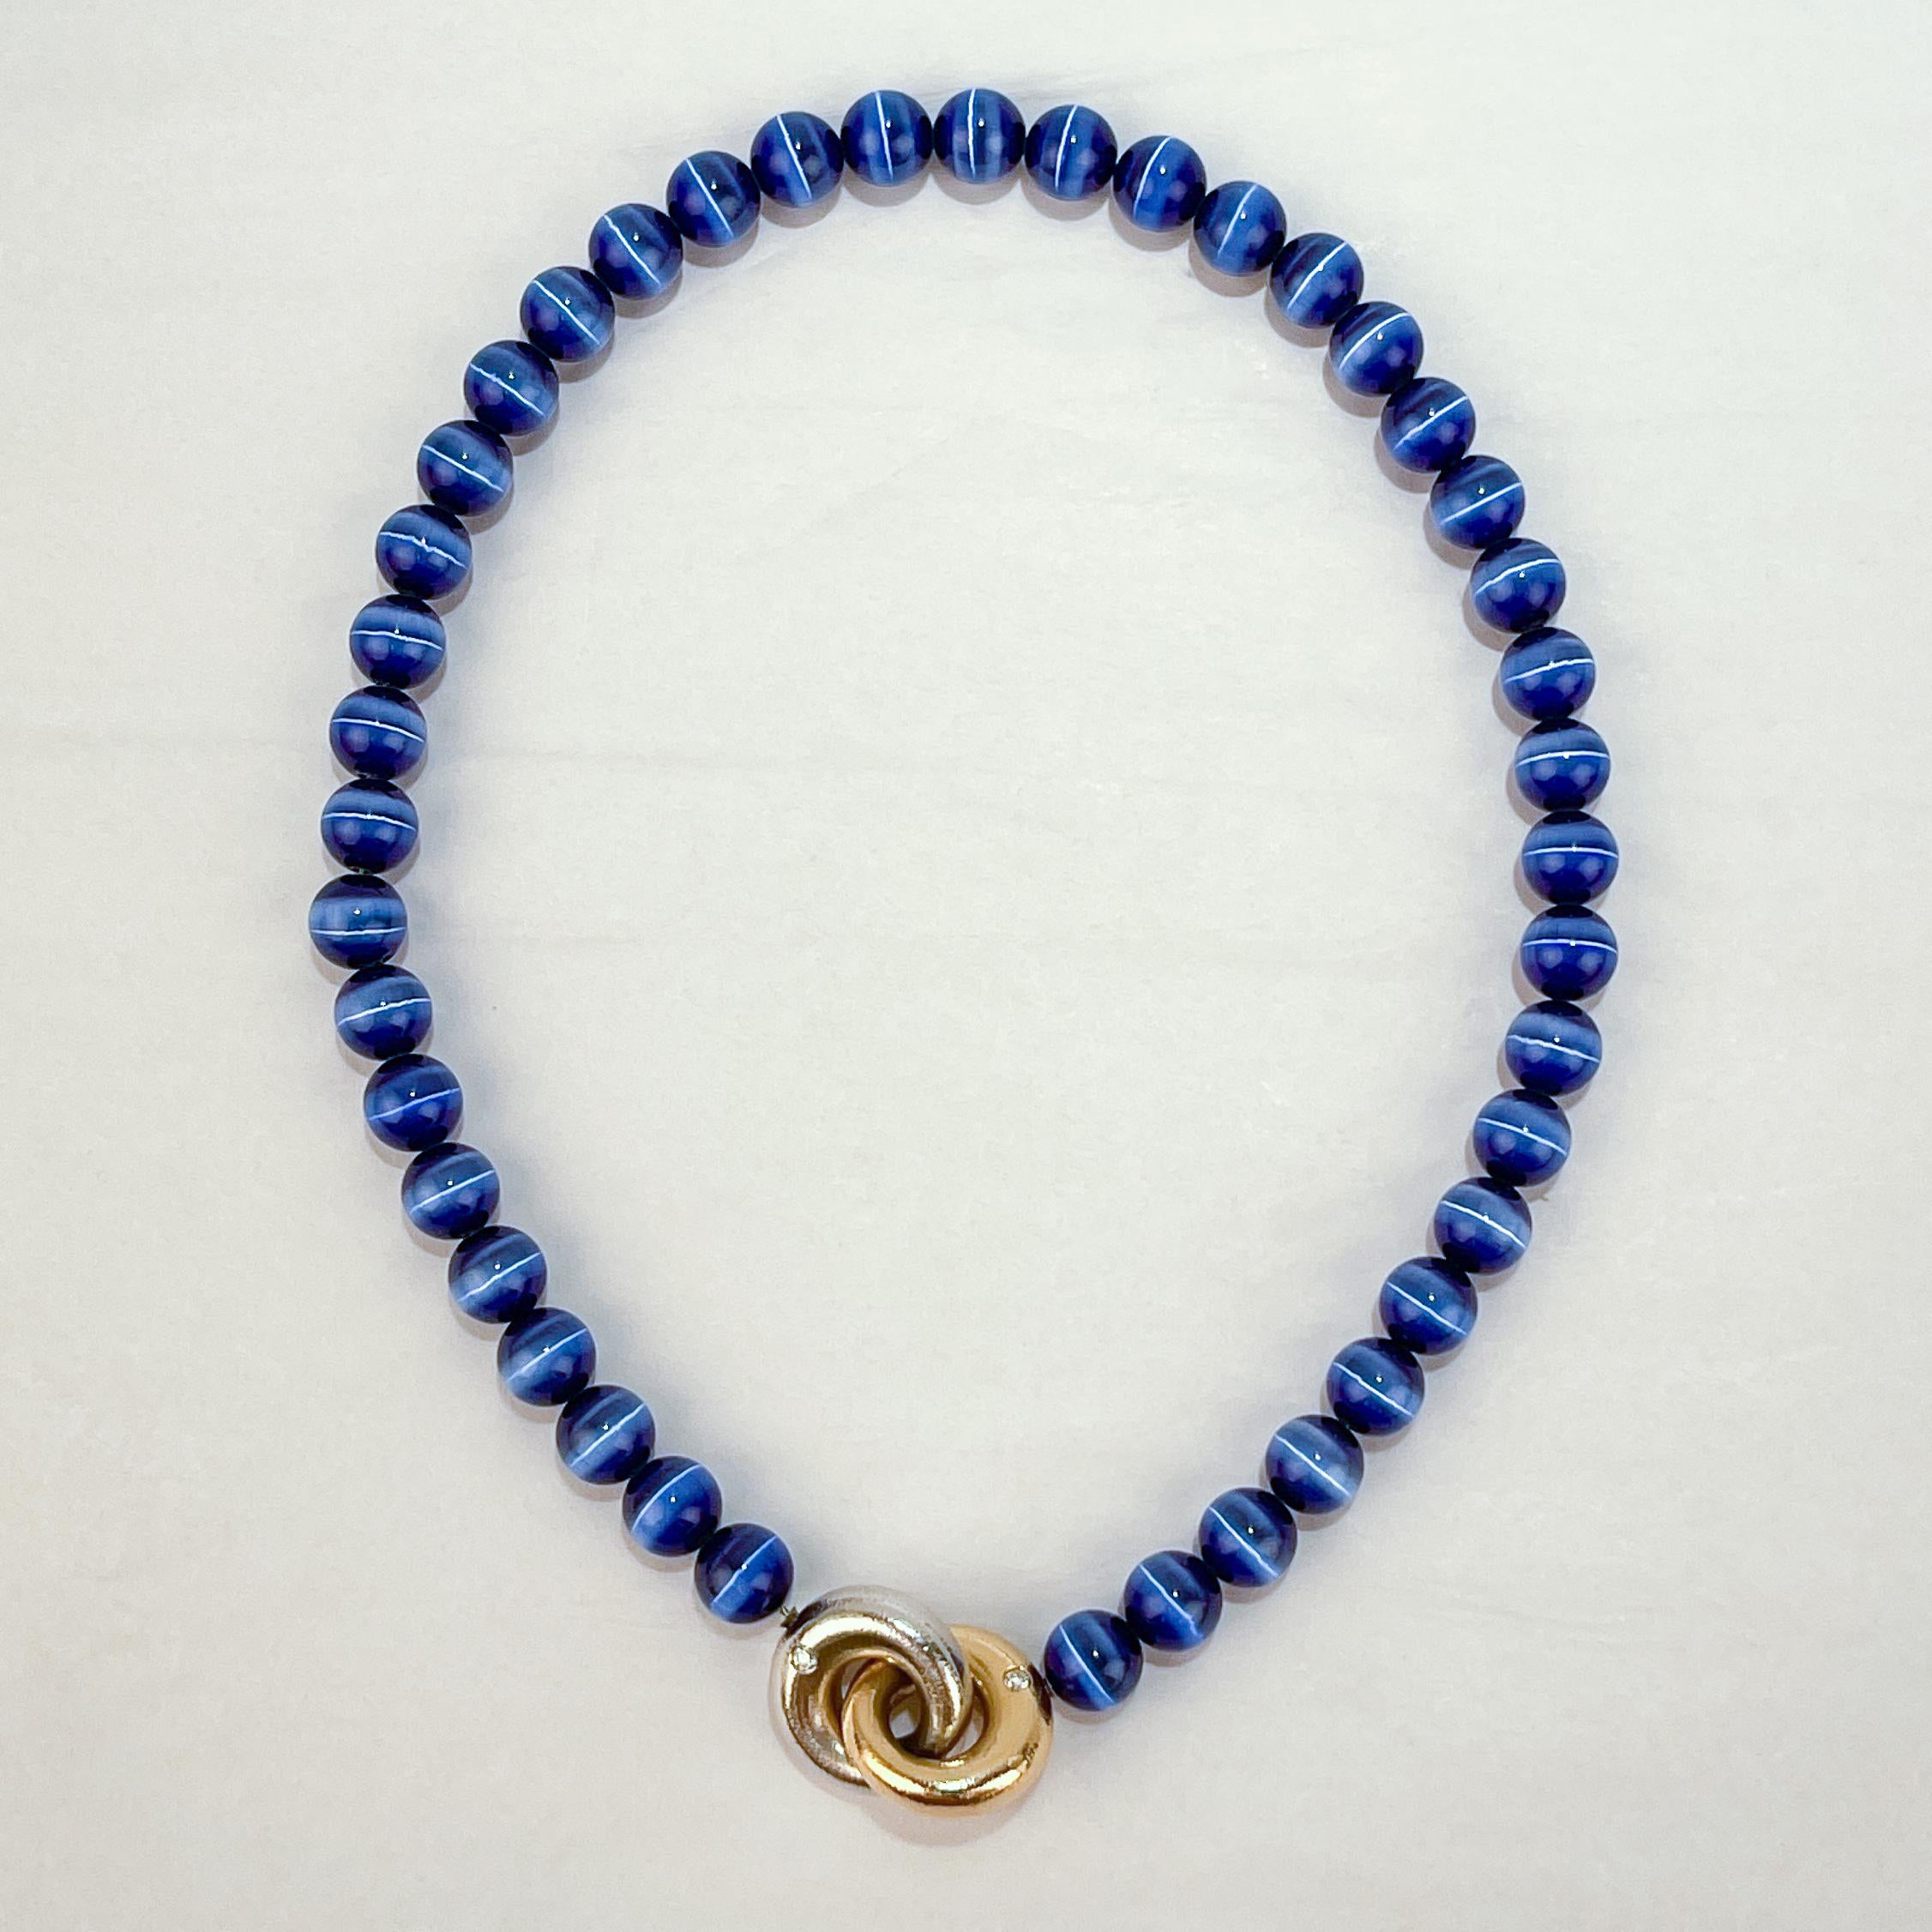 Ole Lynggaard 14k Gold & Blue Tiger's Eye Beaded Collier or Choker Necklace For Sale 7